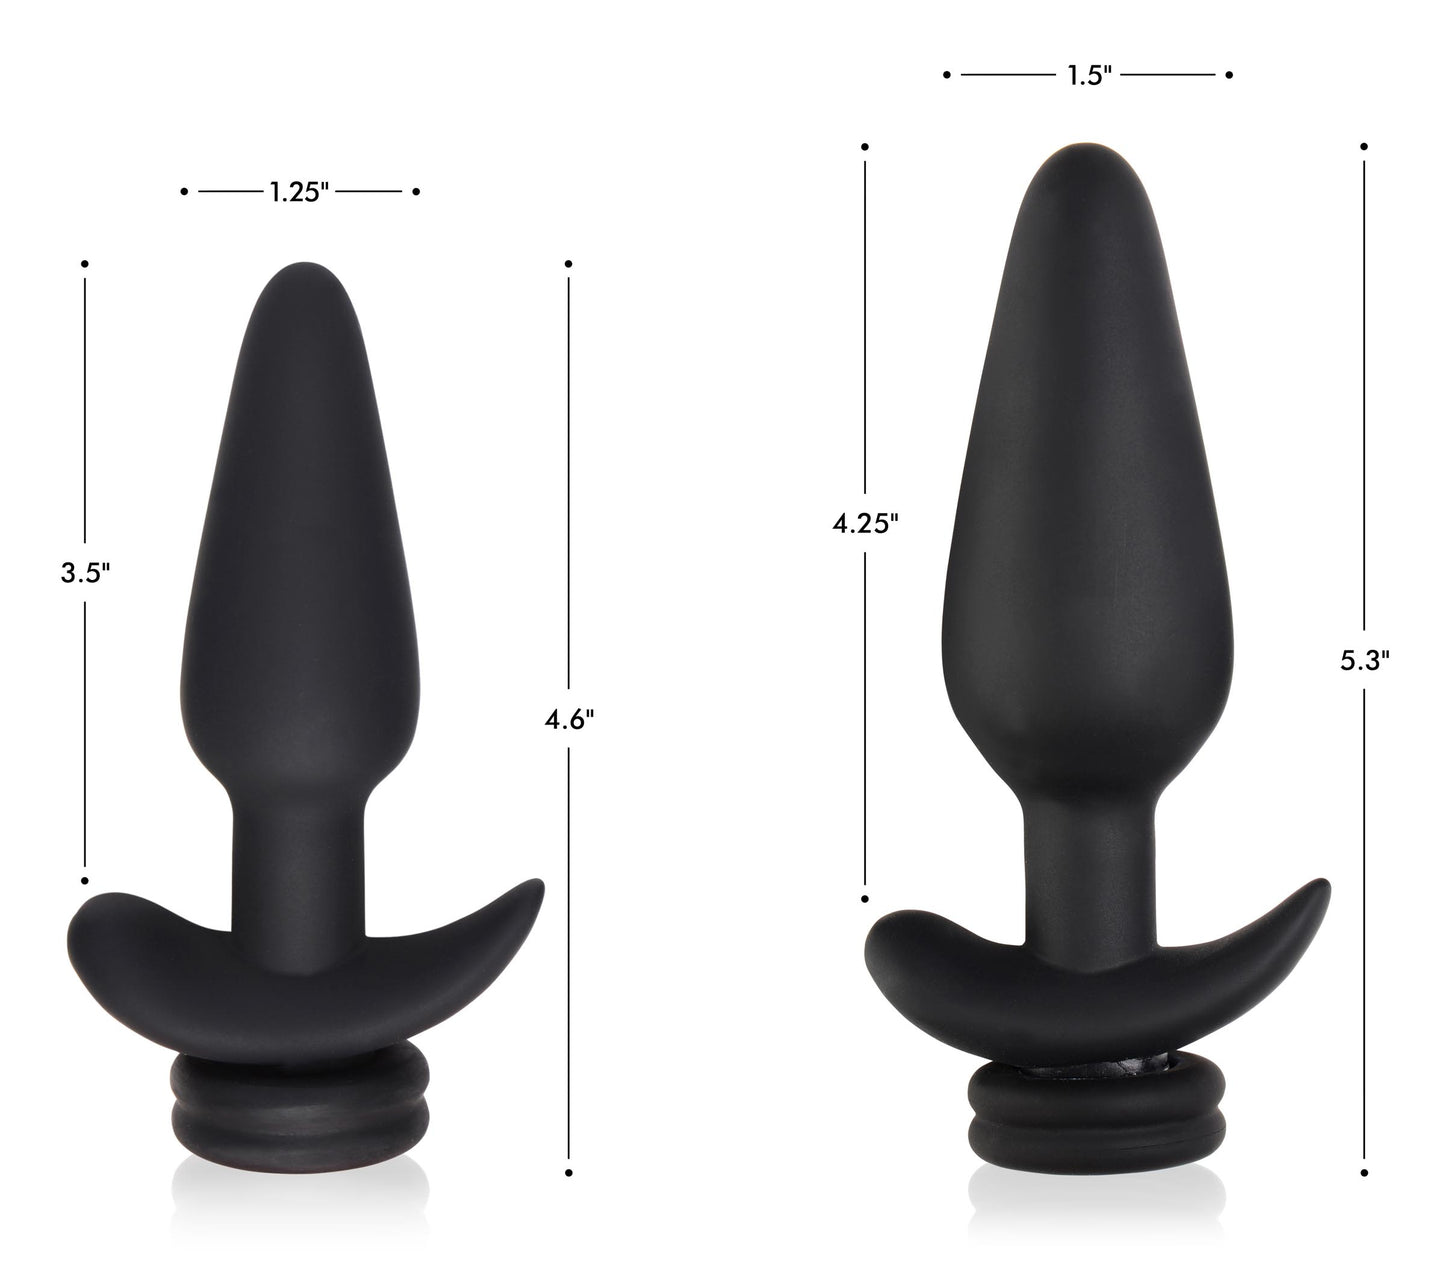 Large Vibrating Anal Plug With Interchangeable Fox Tail - Black